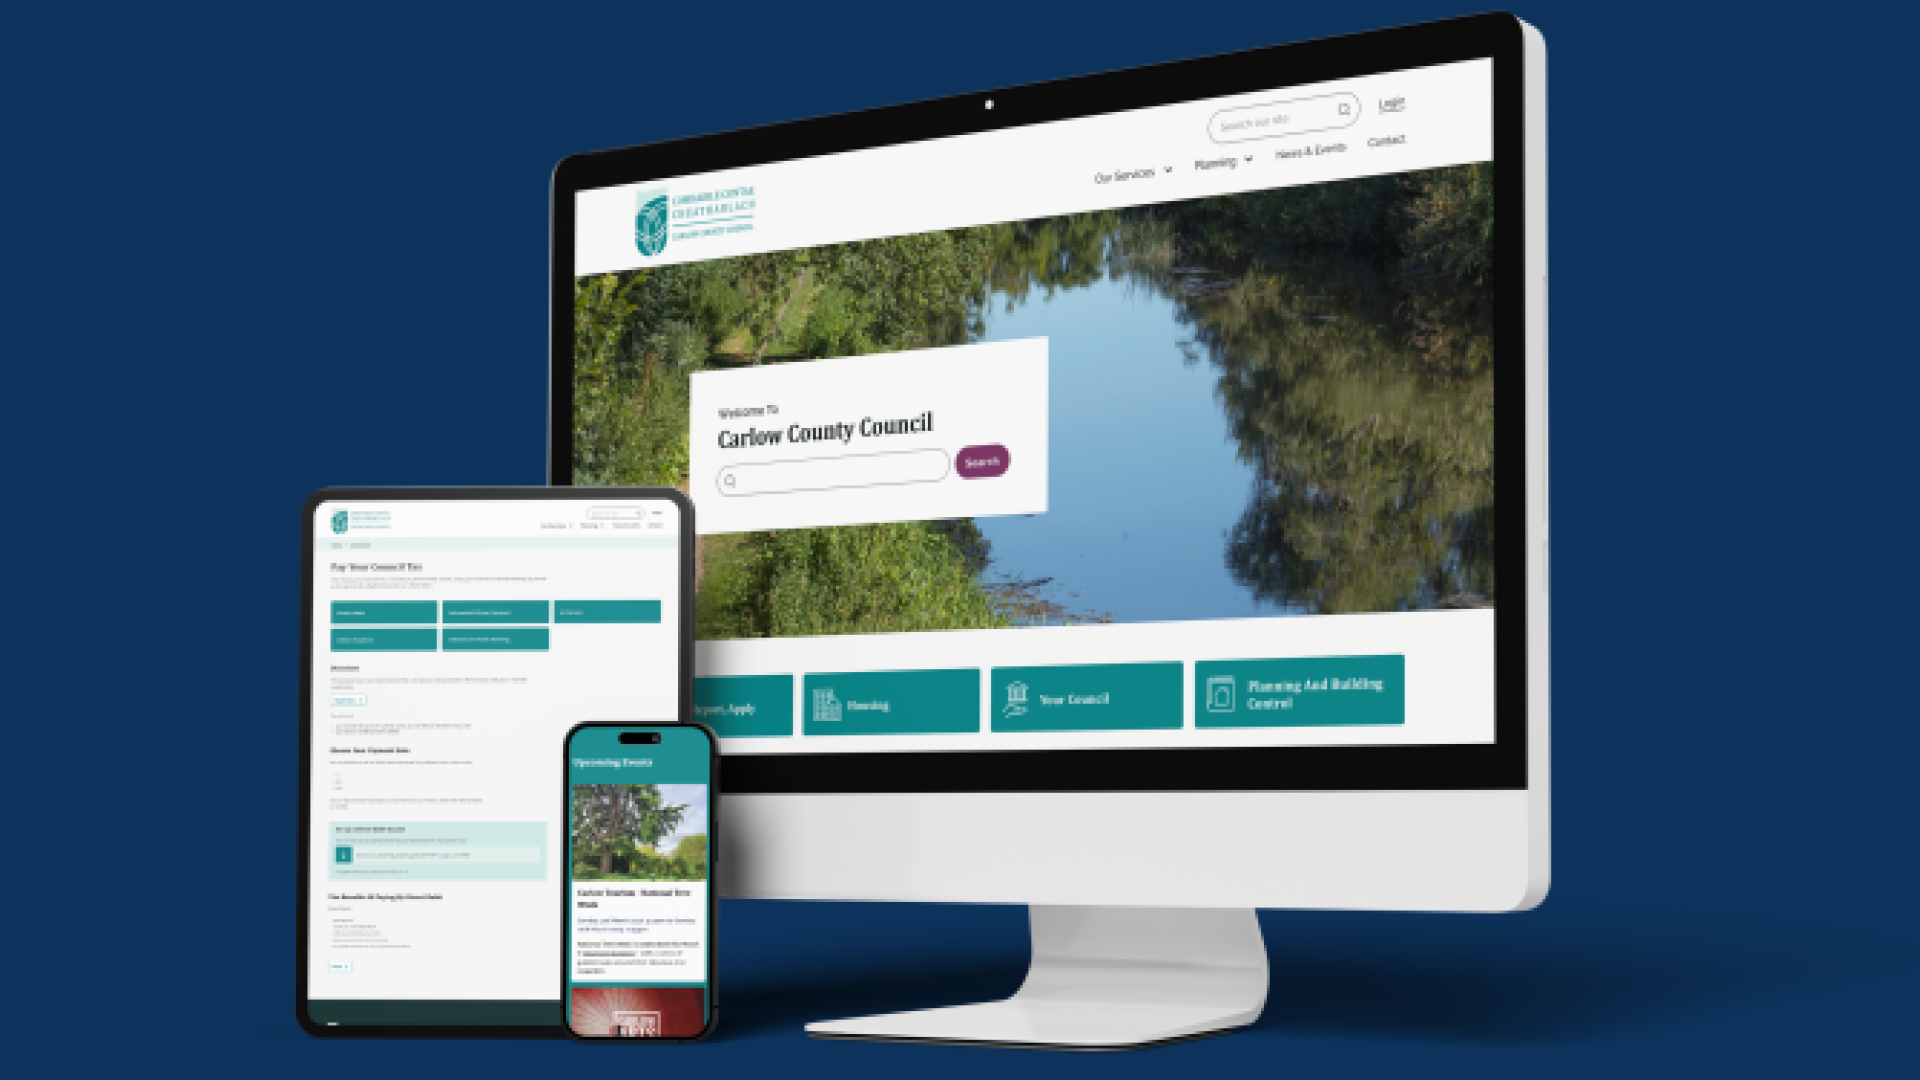 Carlow County Council's website is responsive across all devices.